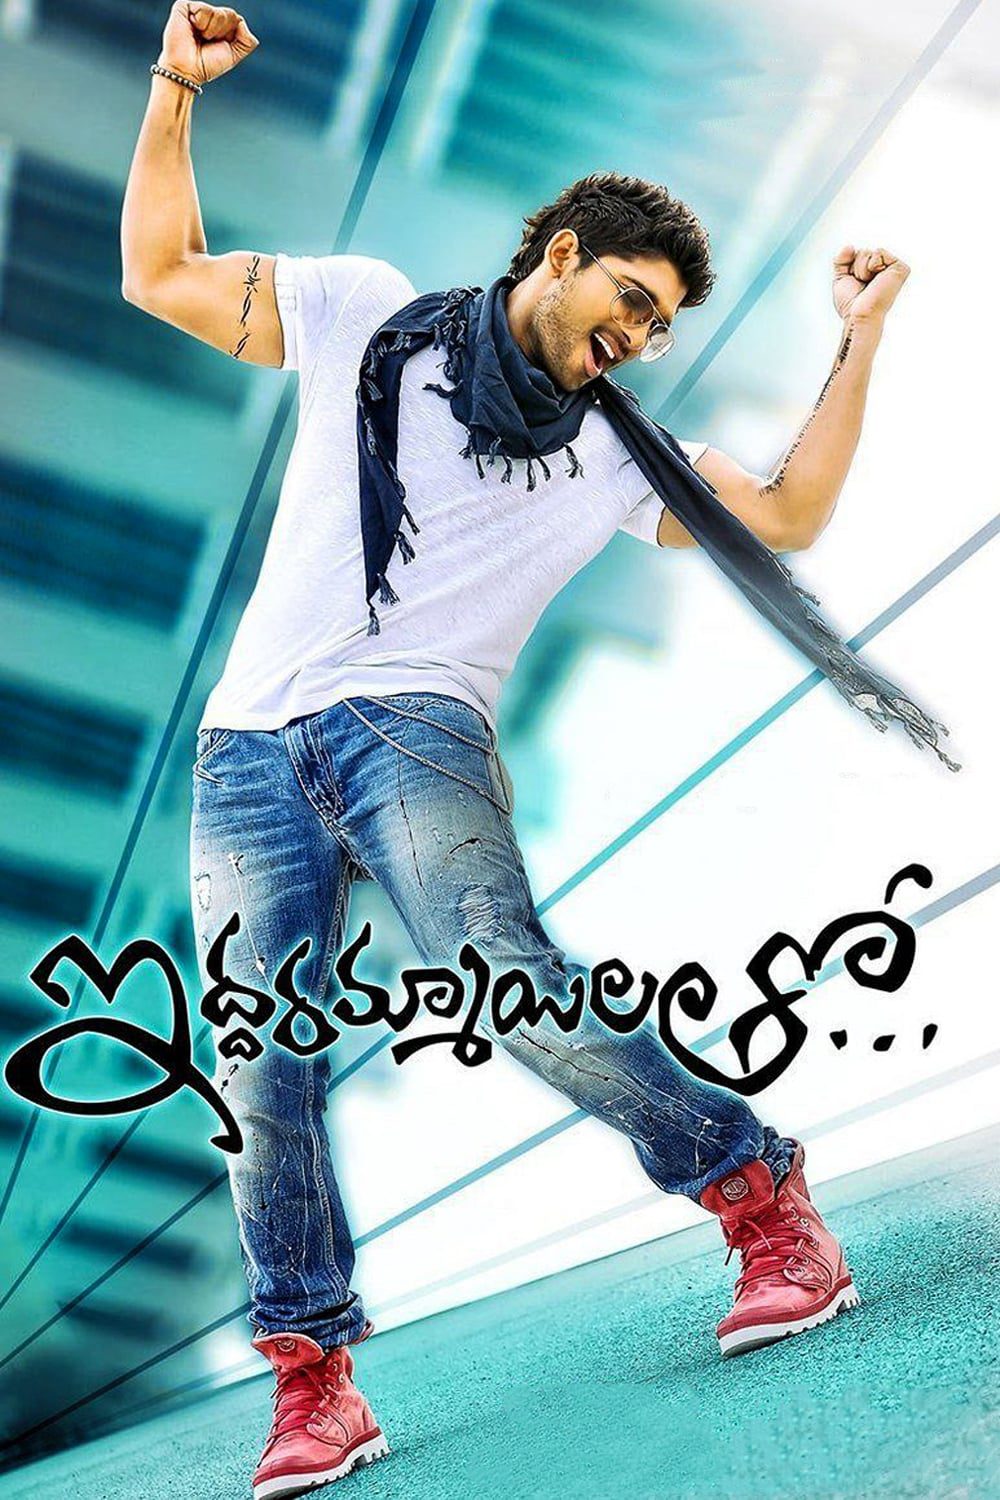 Poster for the movie "Iddarammayilatho"